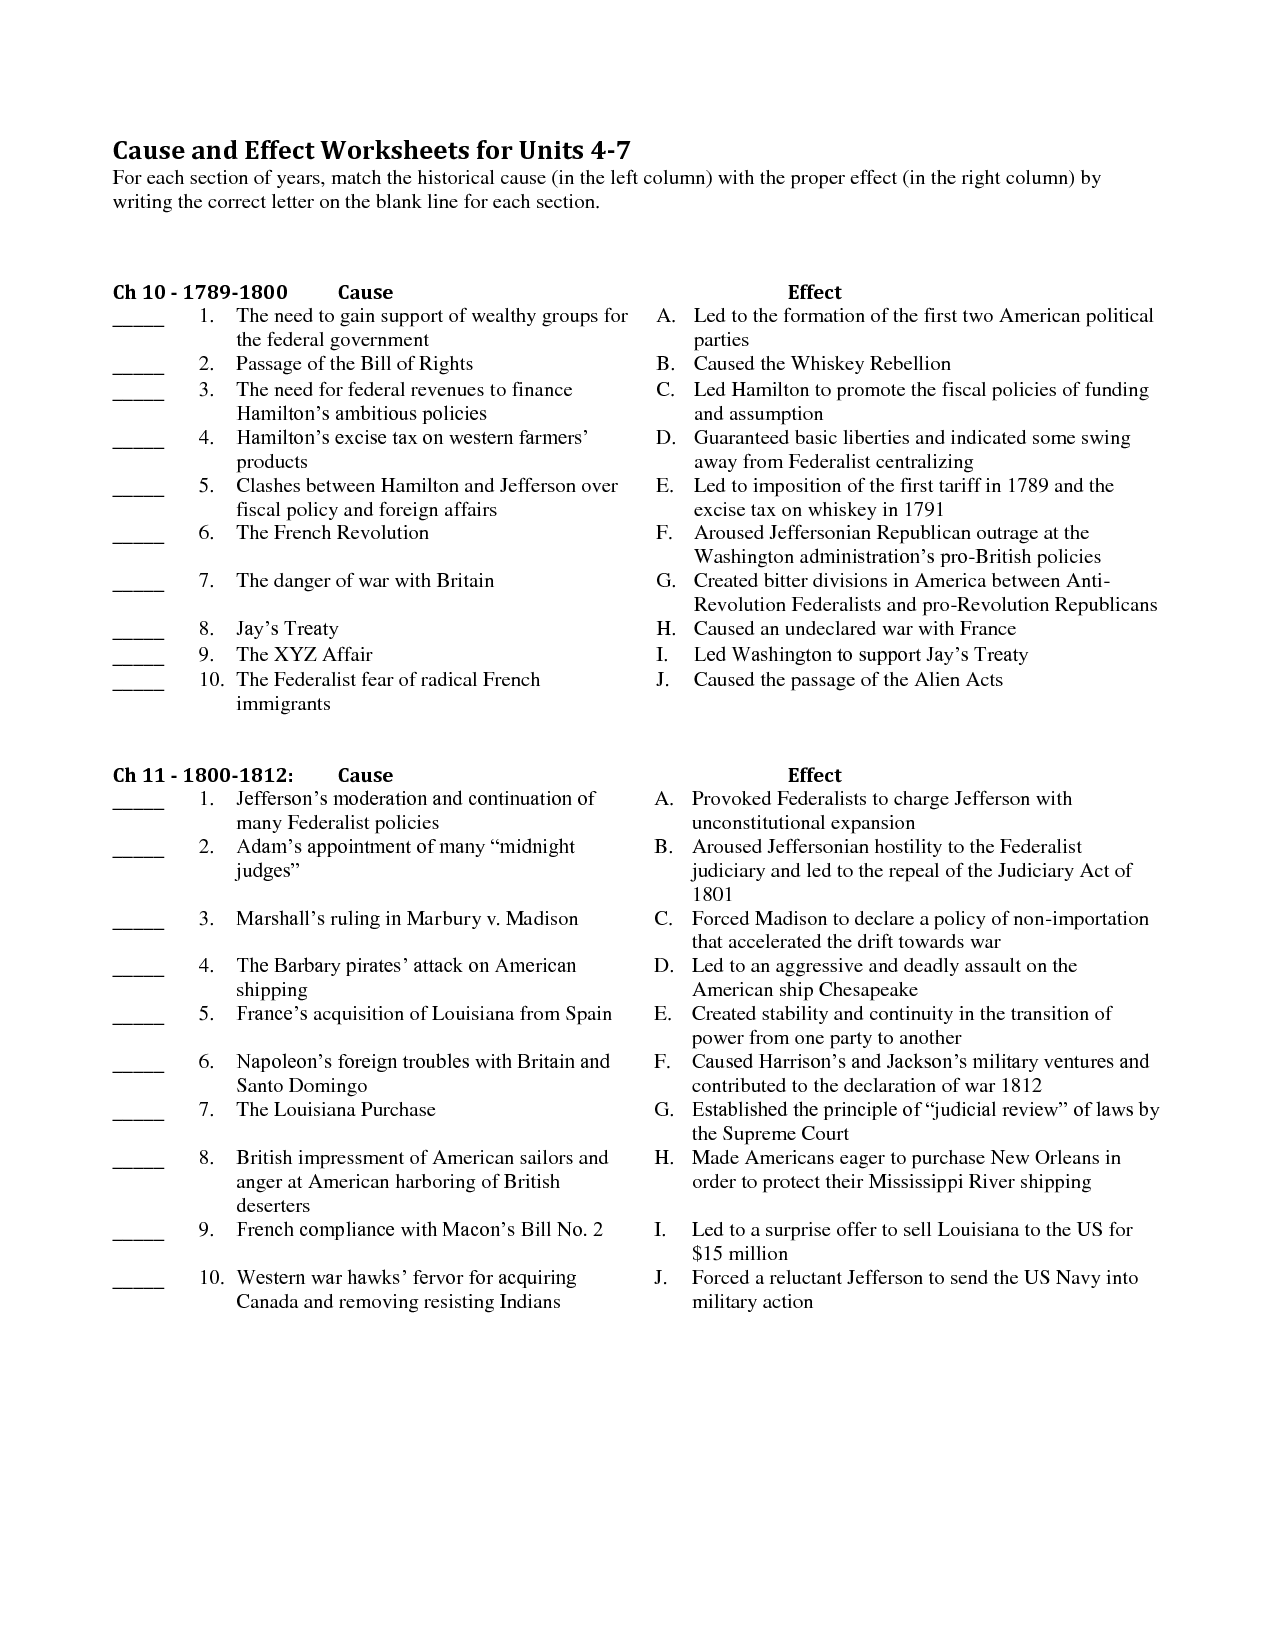 10-cause-and-effect-blank-worksheets-worksheeto